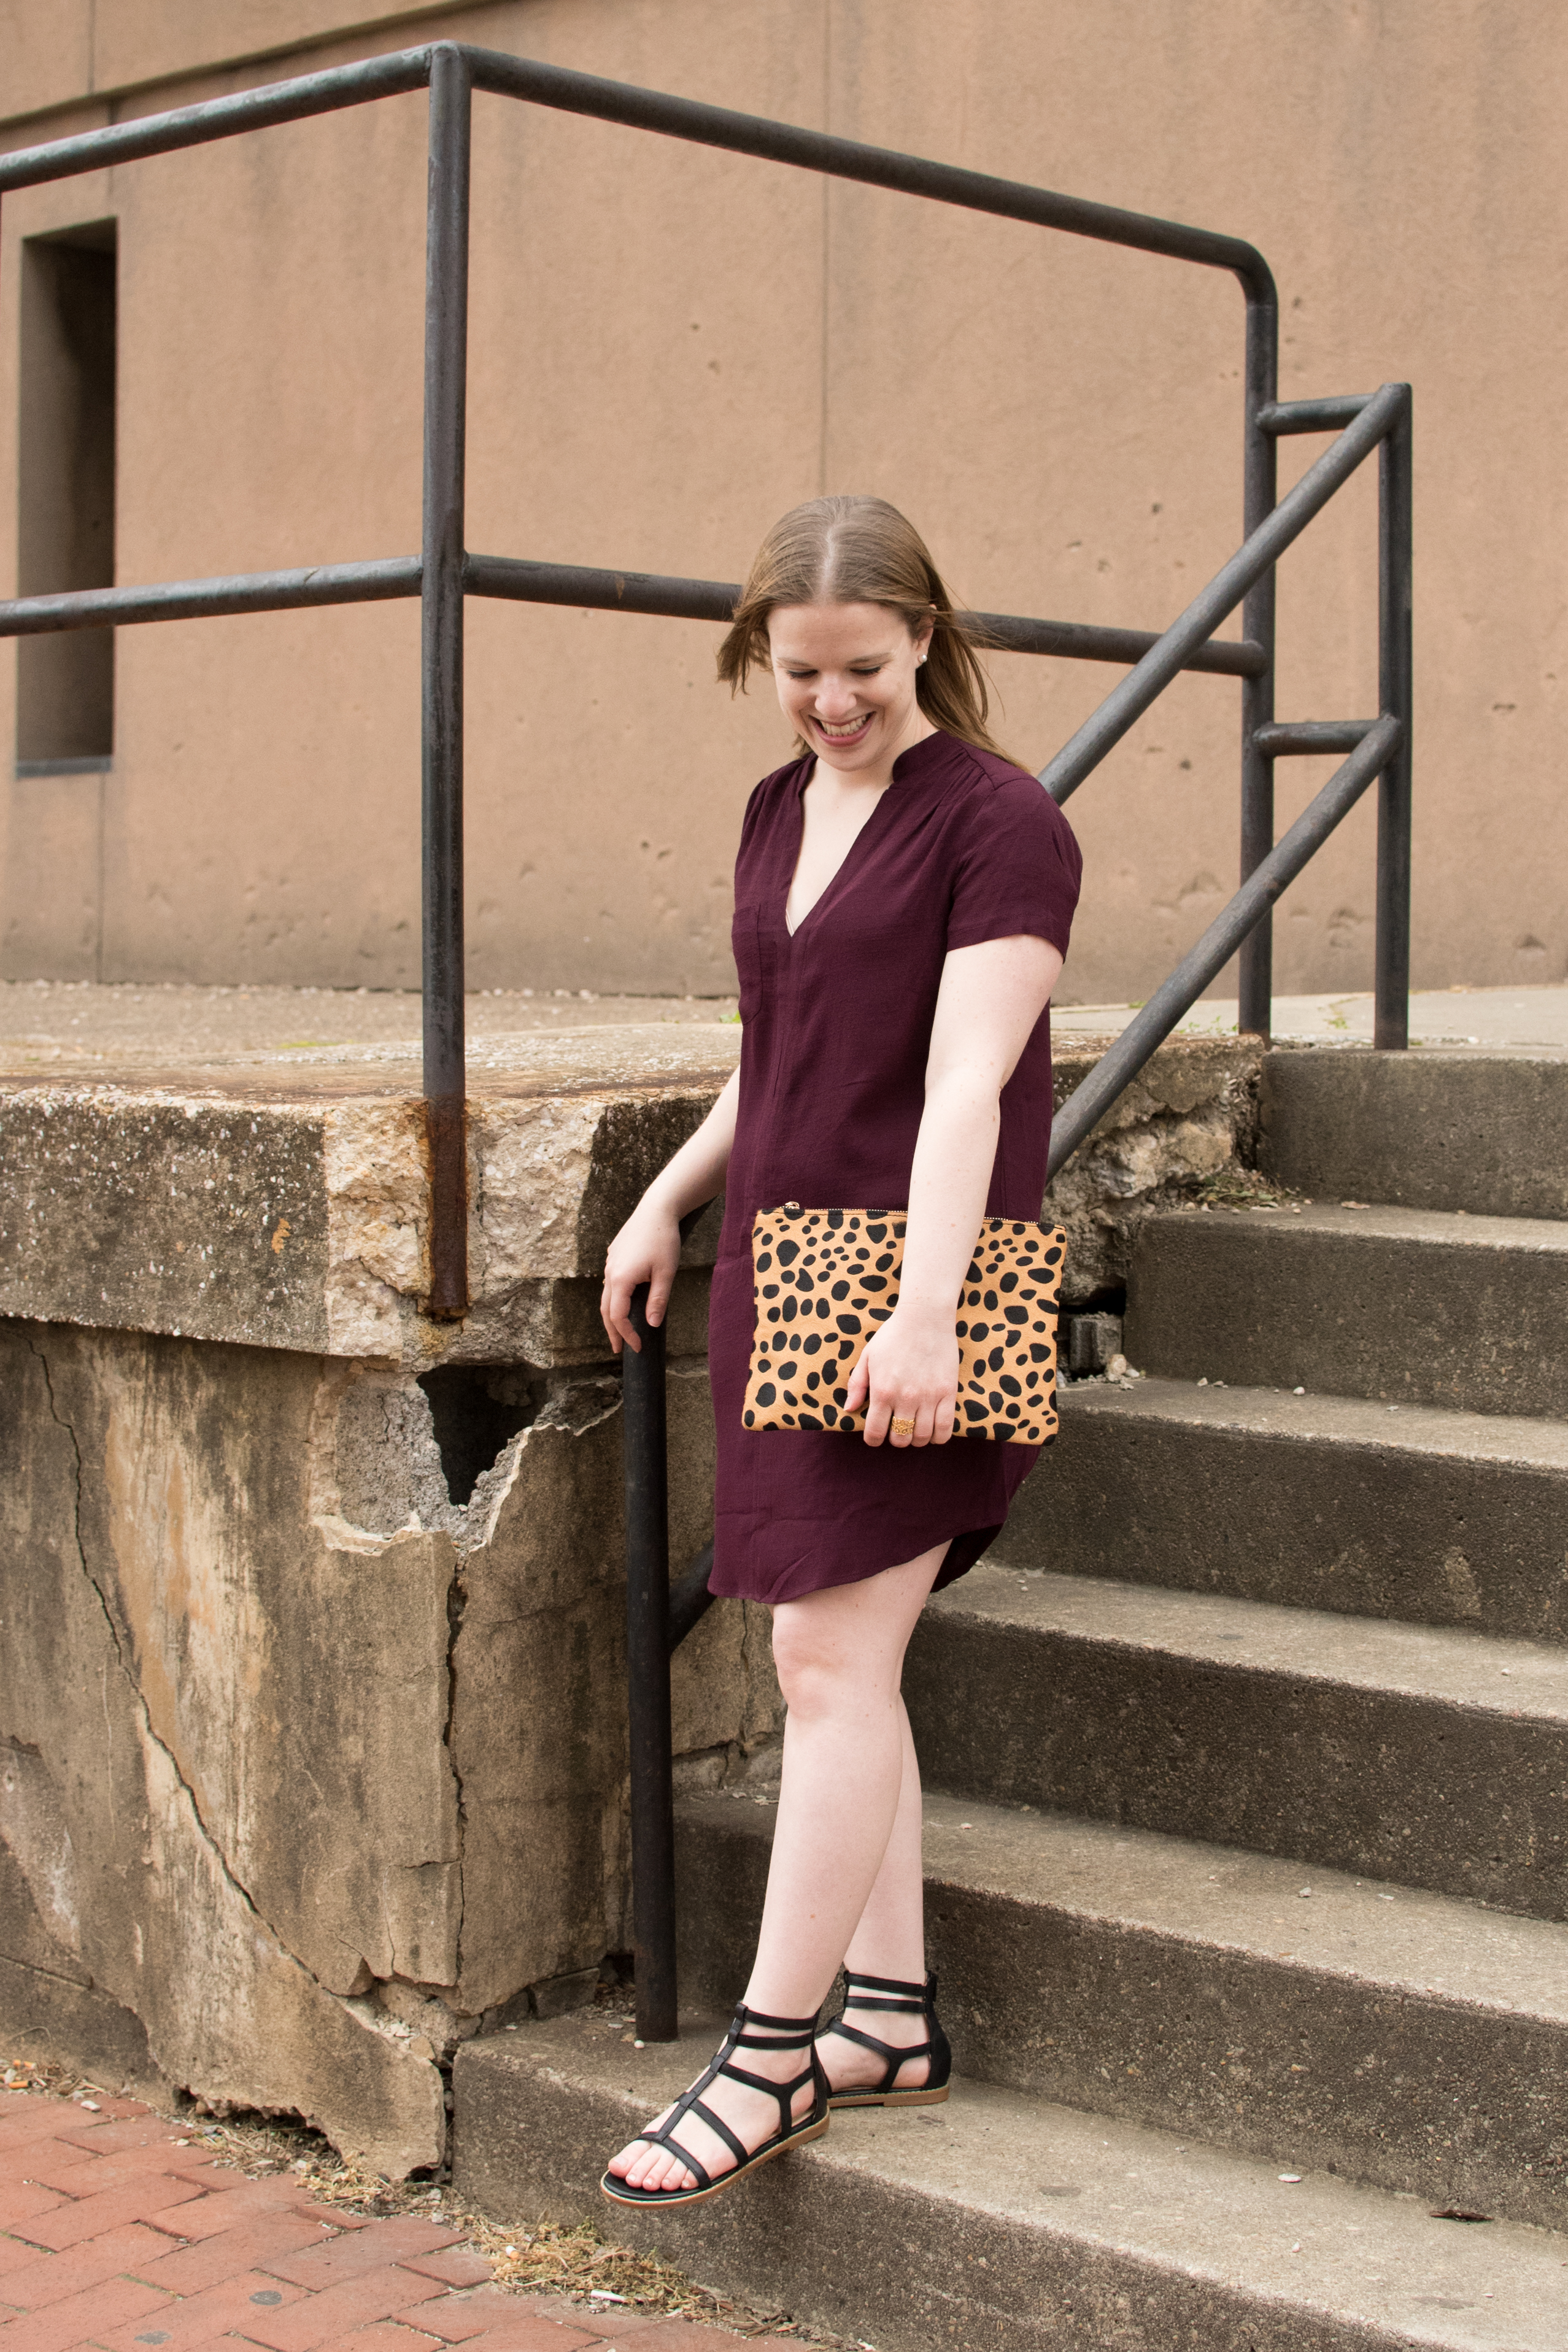 The Hush Puppies Sandals | Something Good, women, fashion, clothing, clothes, style, fall fashion, spring, lush split neck dress, nordstrom dress, caged shoes, hush puppies sandals, leopard print clutch, bp at normstrom, shift dress, dress, sandals, clutch, @danaerinw